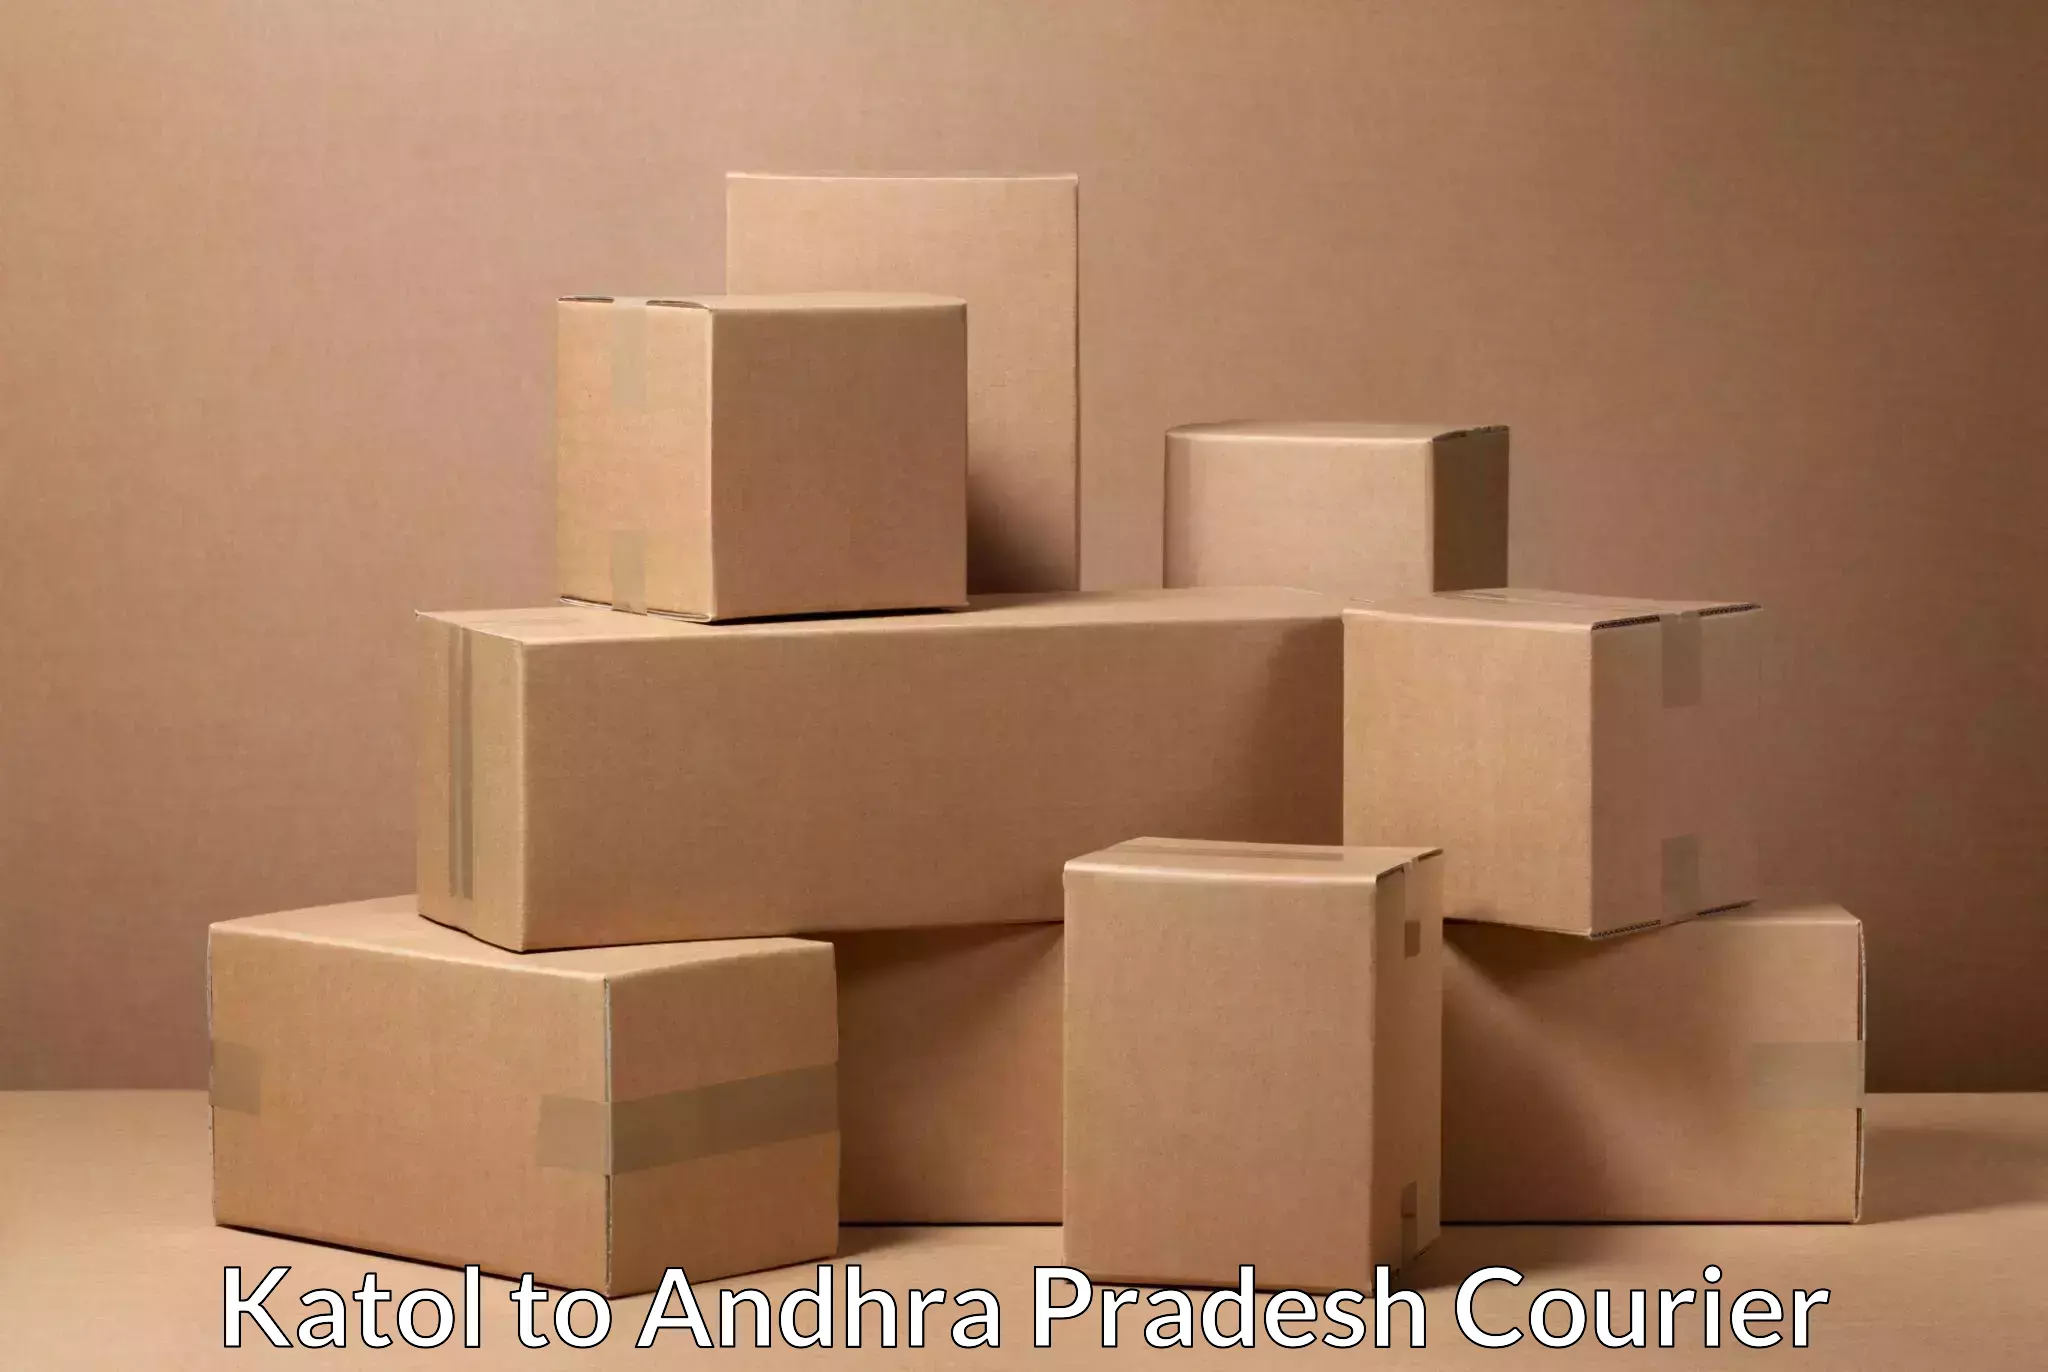 Easy access courier services Katol to Andhra Pradesh